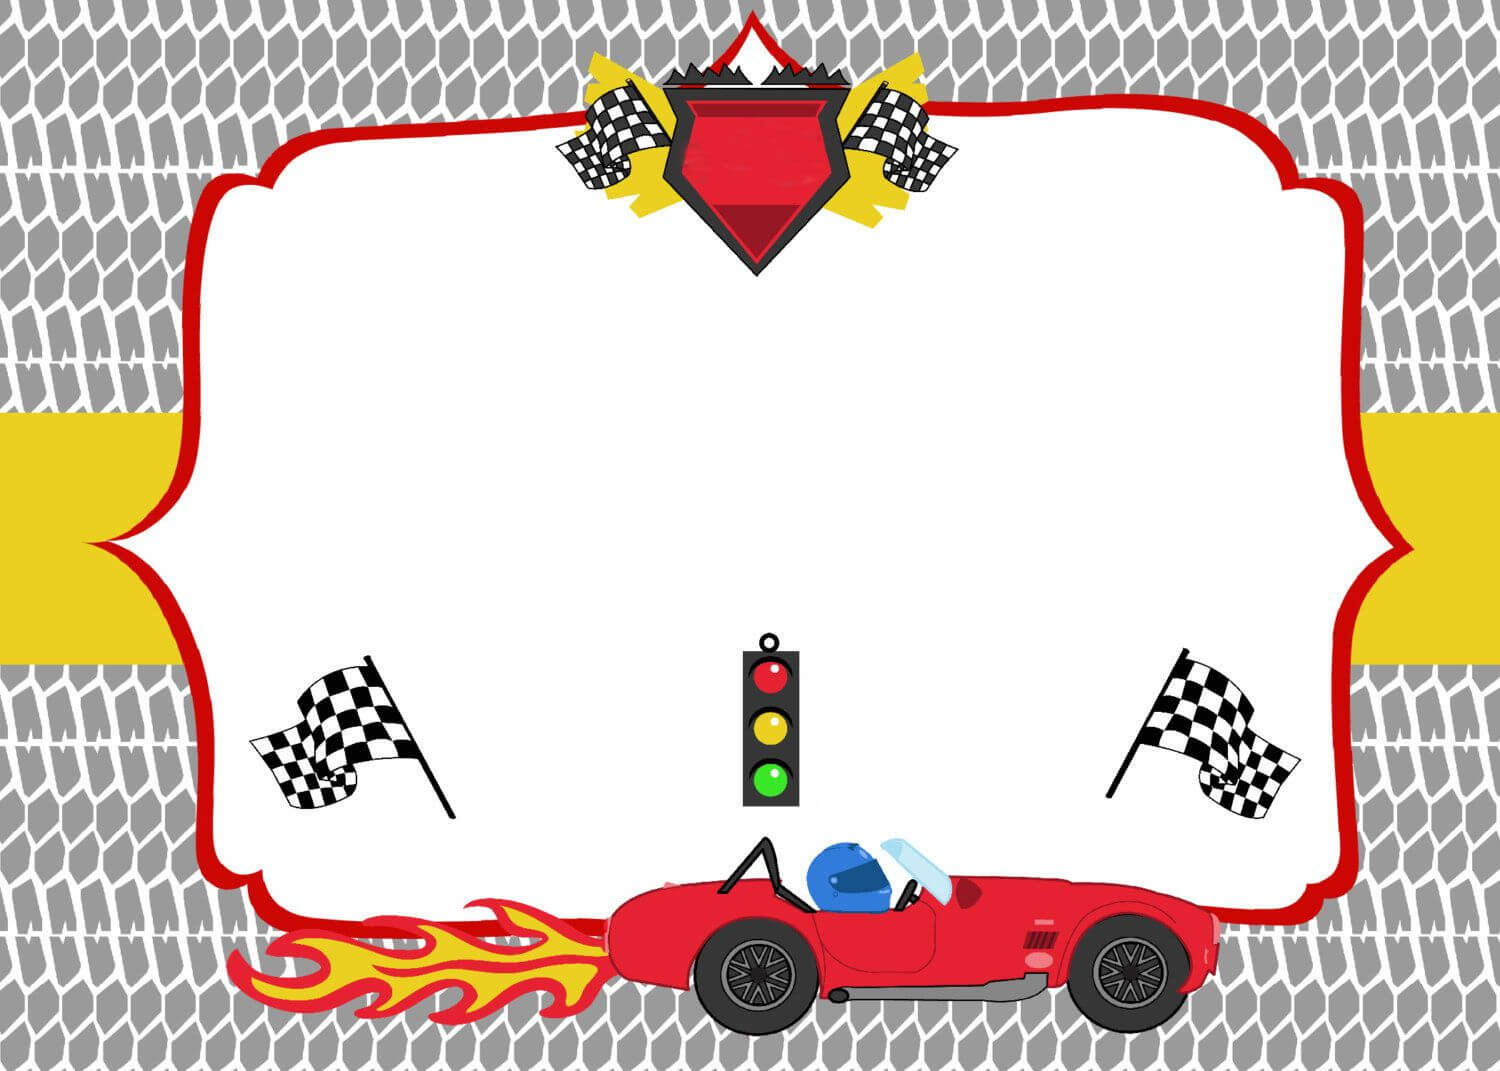 Free Printable Race Car Birthday Party Invitations – Updated With Blank Race Car Templates